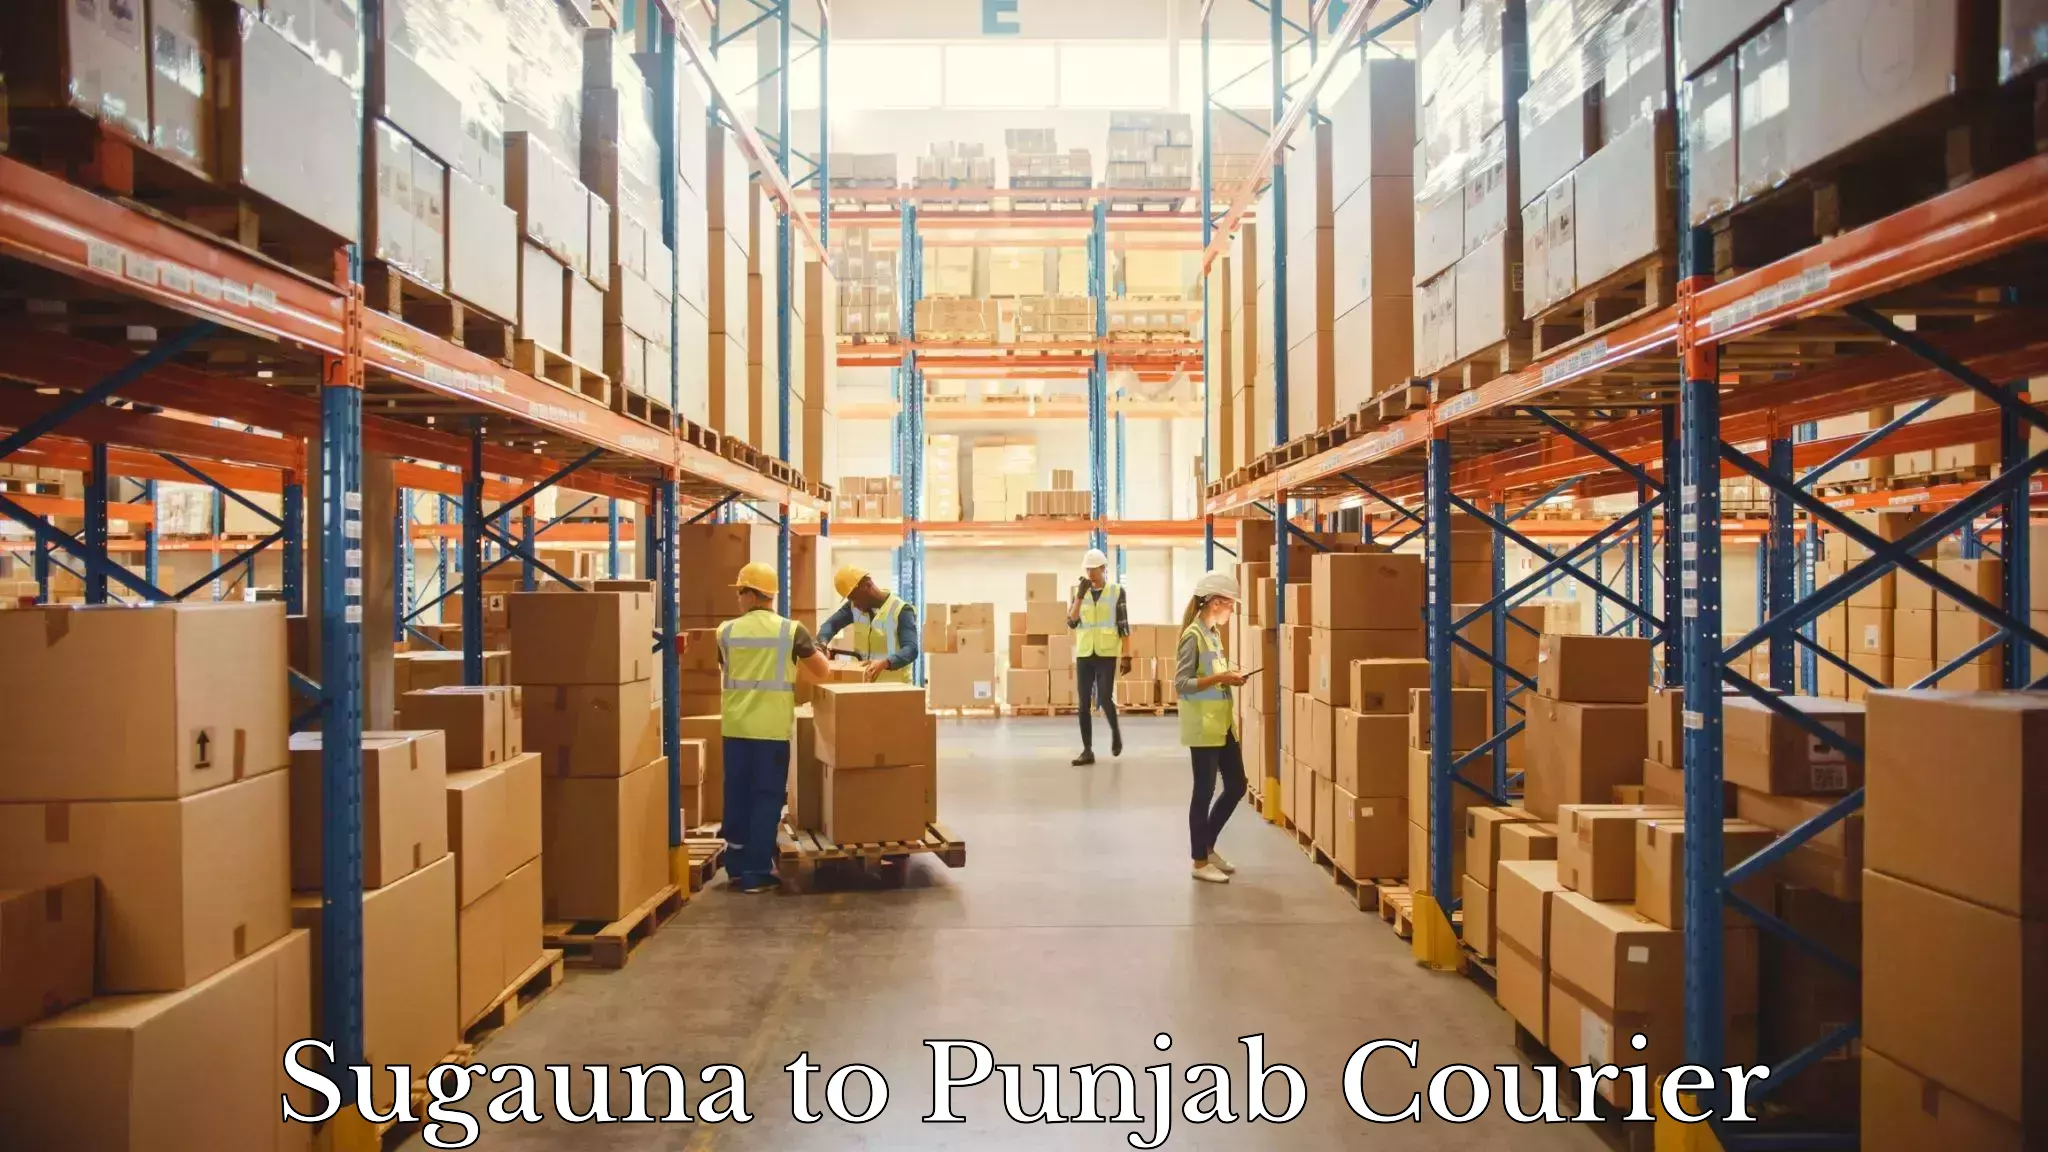 State-of-the-art courier technology Sugauna to Punjab